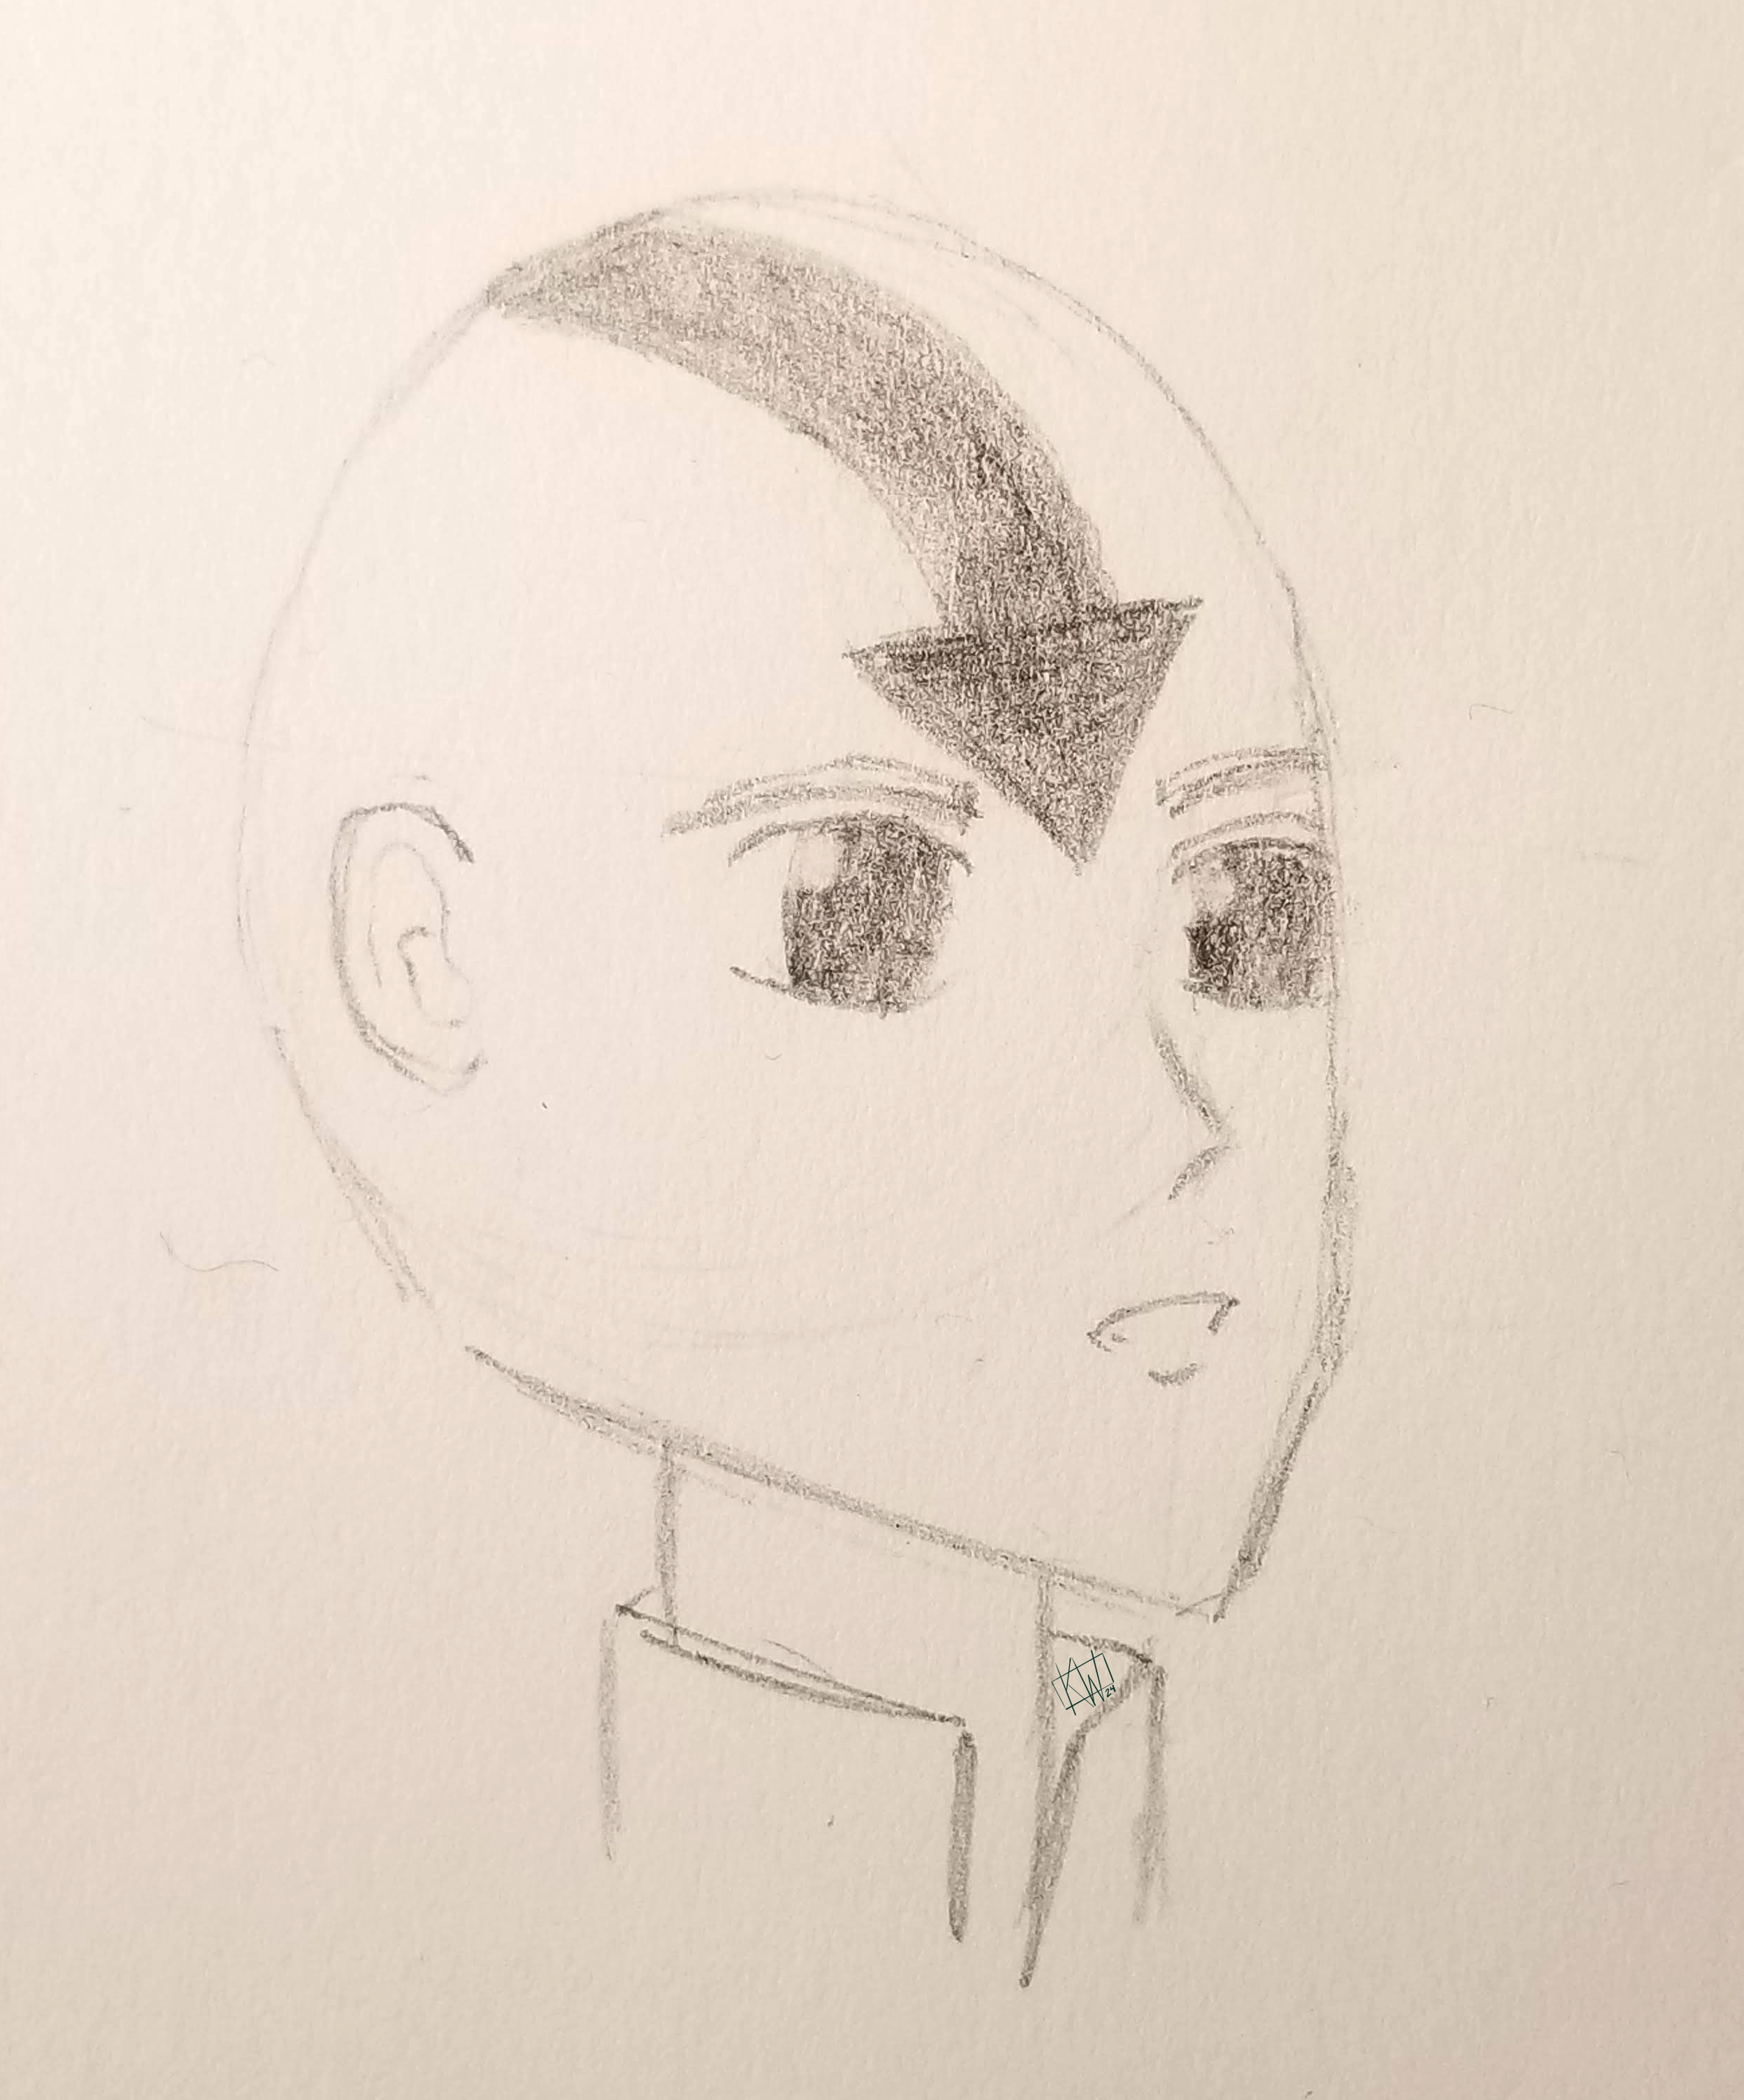 Pencil sketch of Avatar Aang: a happy bald boy with an arrow tattooed on his head that is pointing down towards his nose.